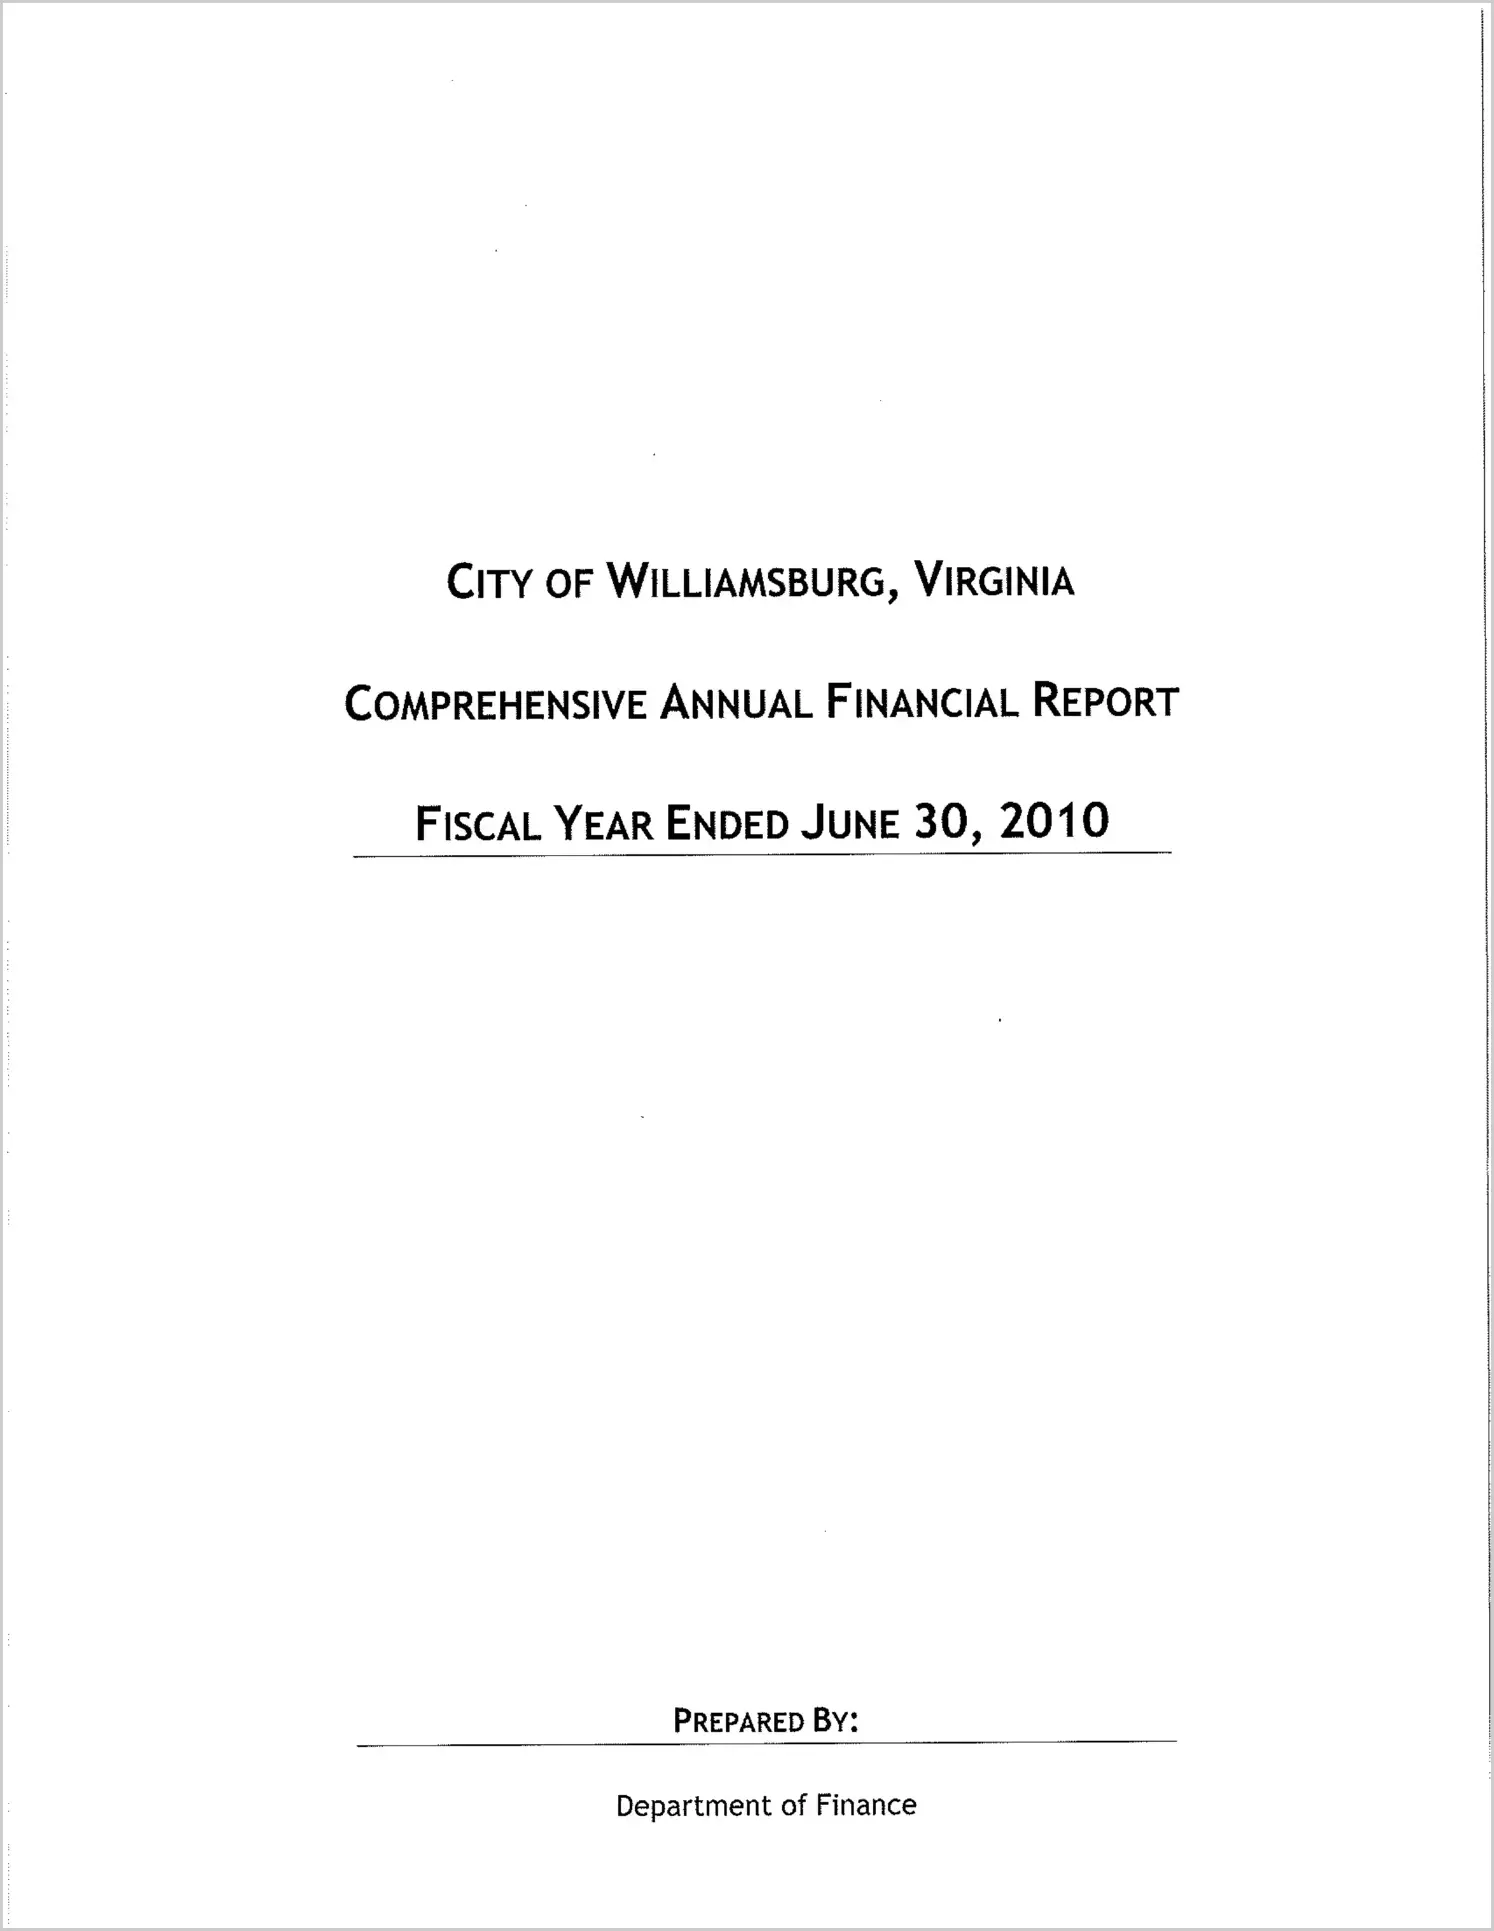 2010 Annual Financial Report for City of Williamsburg